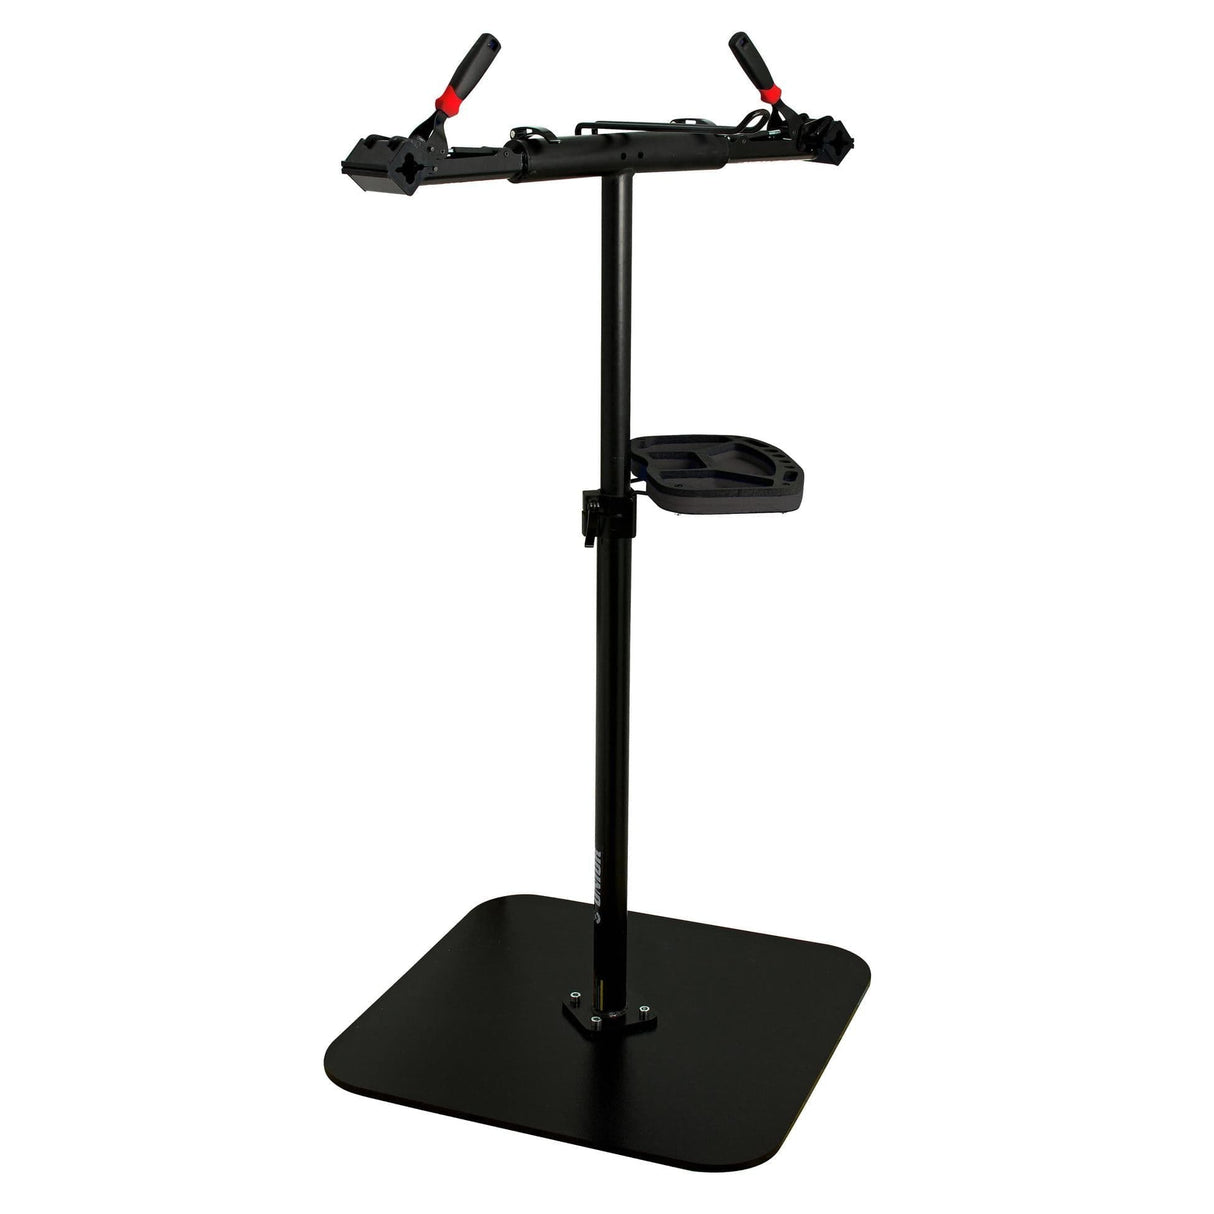 Unior Pro Repair Stand With Double Clamp, Auto Adjustable: Red